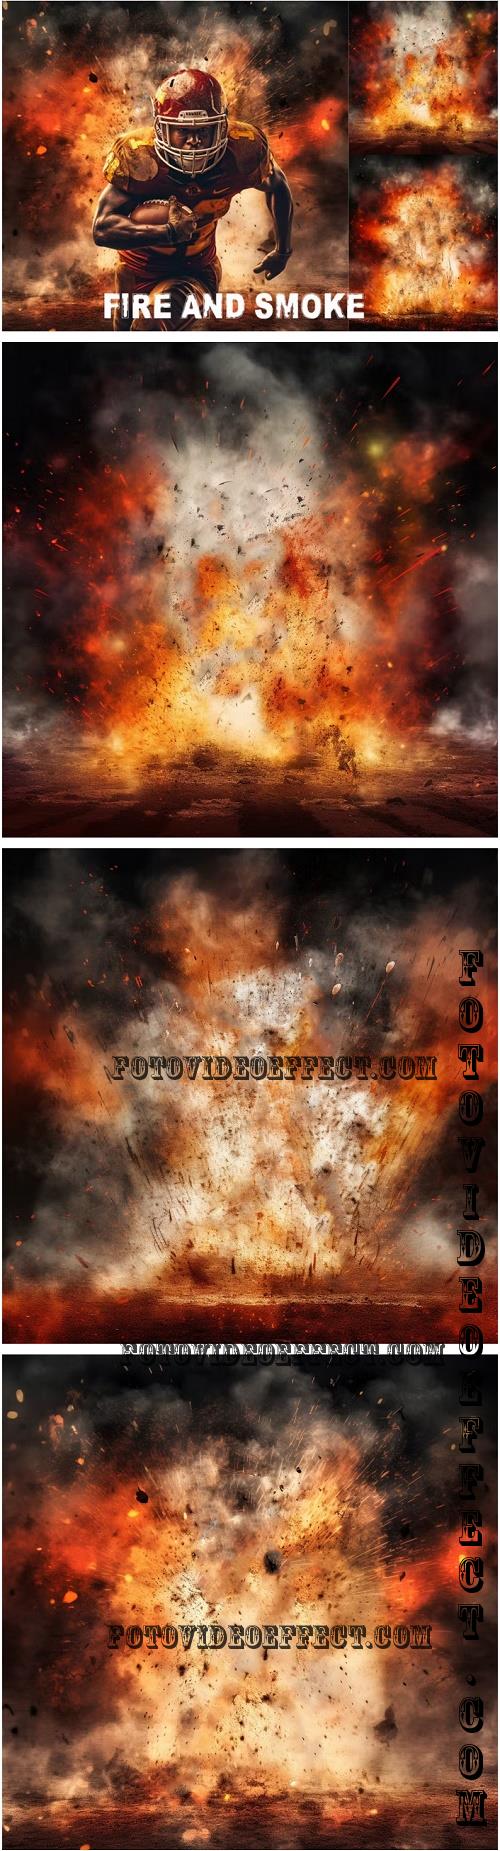 Sports backgrounds: Fire smoke and explosion - CUBERFB